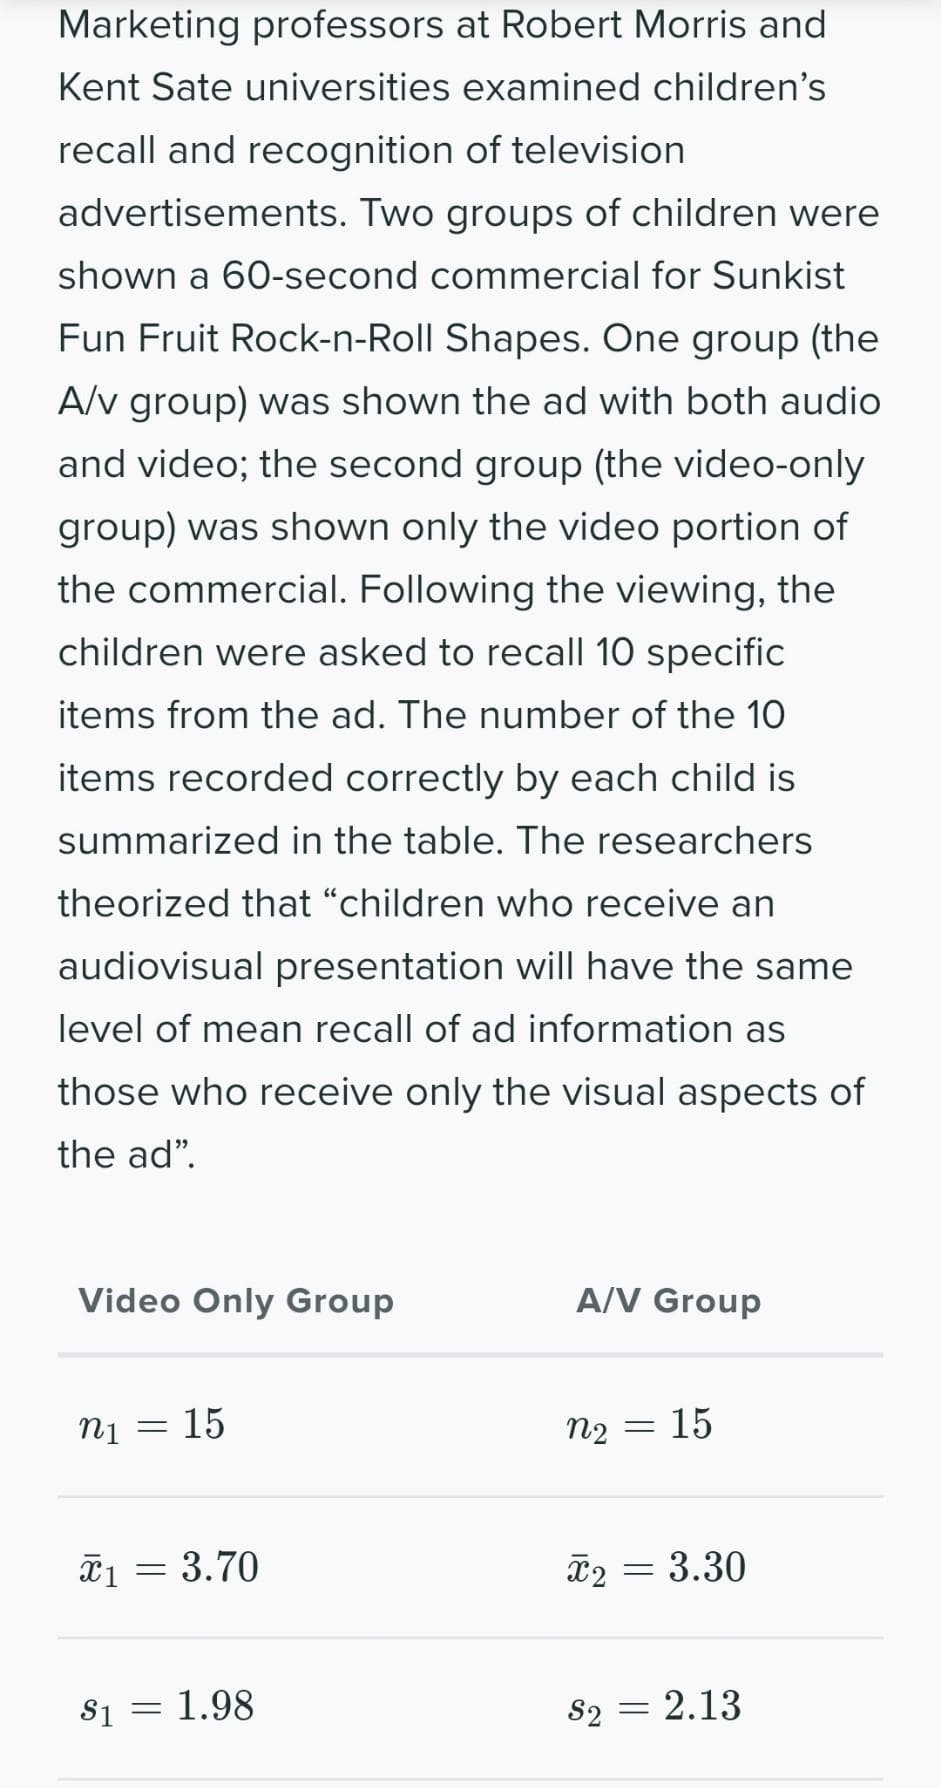 Marketing professors at Robert Morris and
Kent Sate universities examined children's
recall and recognition of television
advertisements. Two groups of children were
shown a 60-second commercial for Sunkist
Fun Fruit Rock-n-Roll Shapes. One group (the
A/v group) was shown the ad with both audio
and video; the second group (the video-only
group) was shown only the video portion of
the commercial. Following the viewing, the
children were asked to recall 10 specific
items from the ad. The number of the 10
items recorded correctly by each child is
summarized in the table. The researchers
theorized that "children who receive an
audiovisual presentation will have the same
level of mean recall of ad information as
those who receive only the visual aspects of
the ad".
Video Only Group
A/V Group
n1 = 15
n₂ =
15
T₁ = 3.70
T2 = 3.30
$1
1.98
S2 = 2.13
=